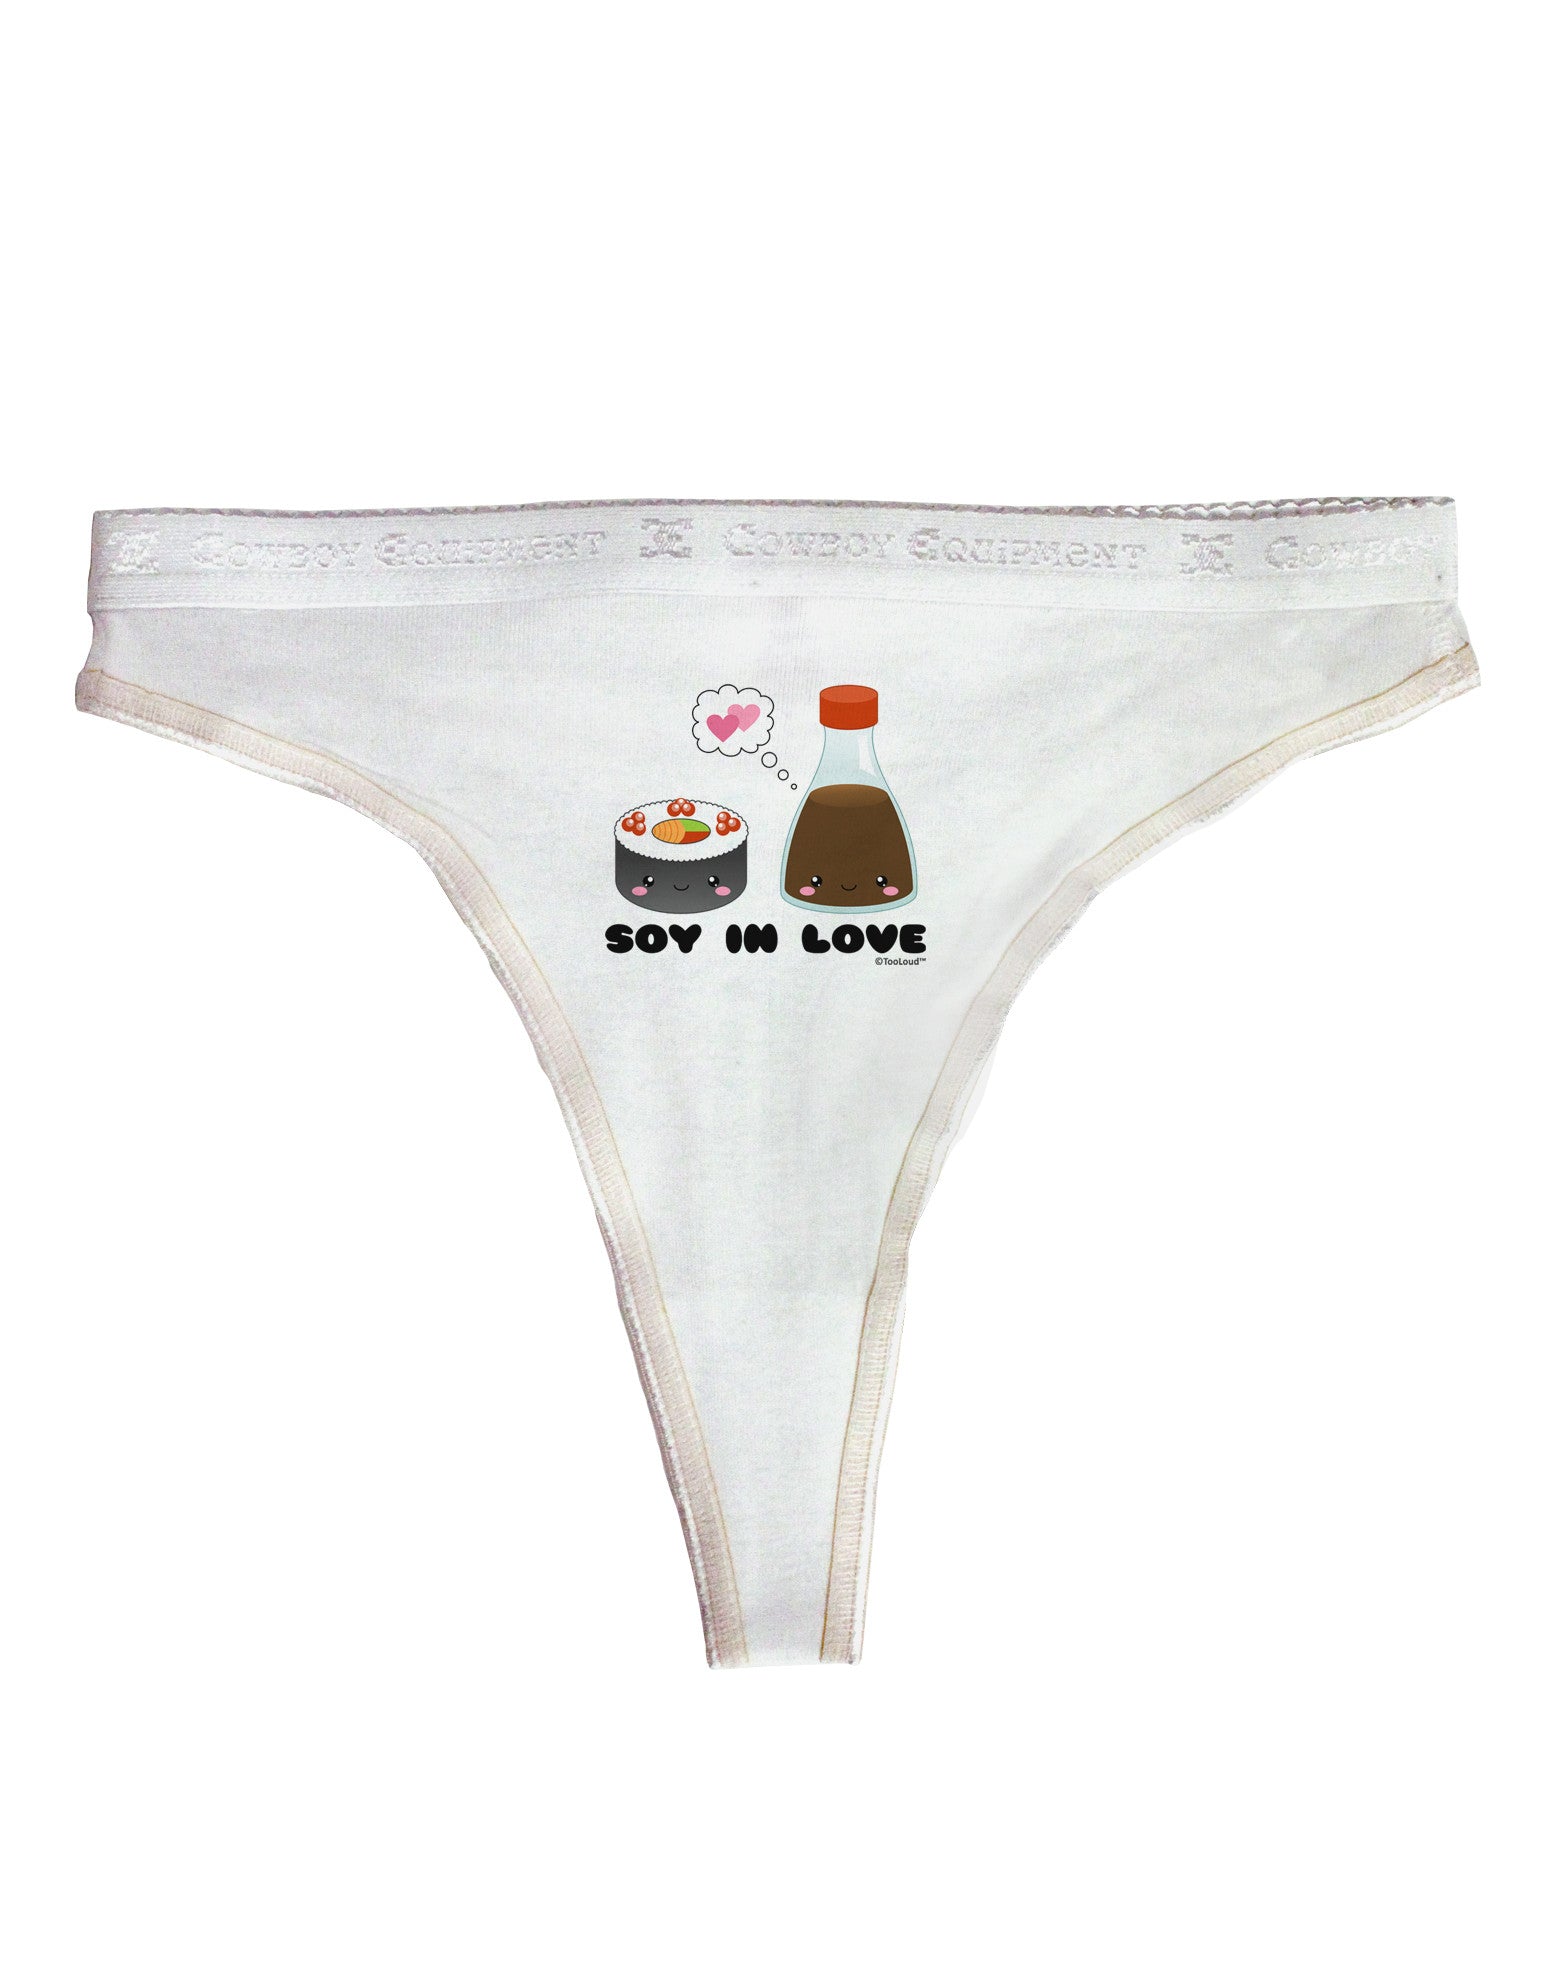 Cute Sushi and Soy Sauce - Soy In Love Womens Thong Underwear by